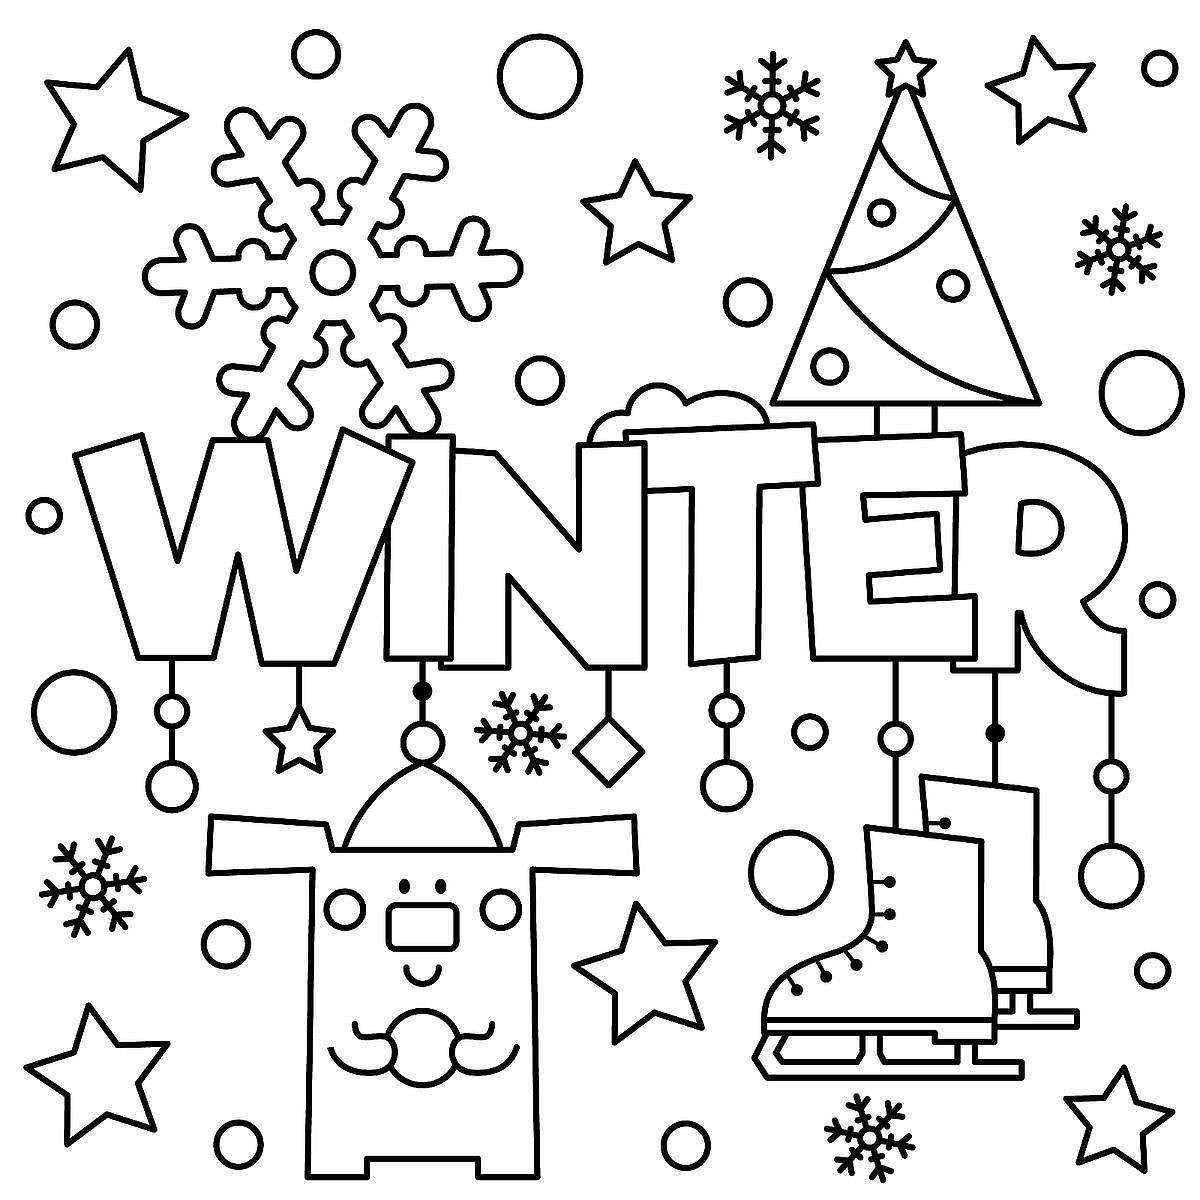 Winter Coloring Pages Printable
 Winter Puzzle & Coloring Pages Printable Winter Themed